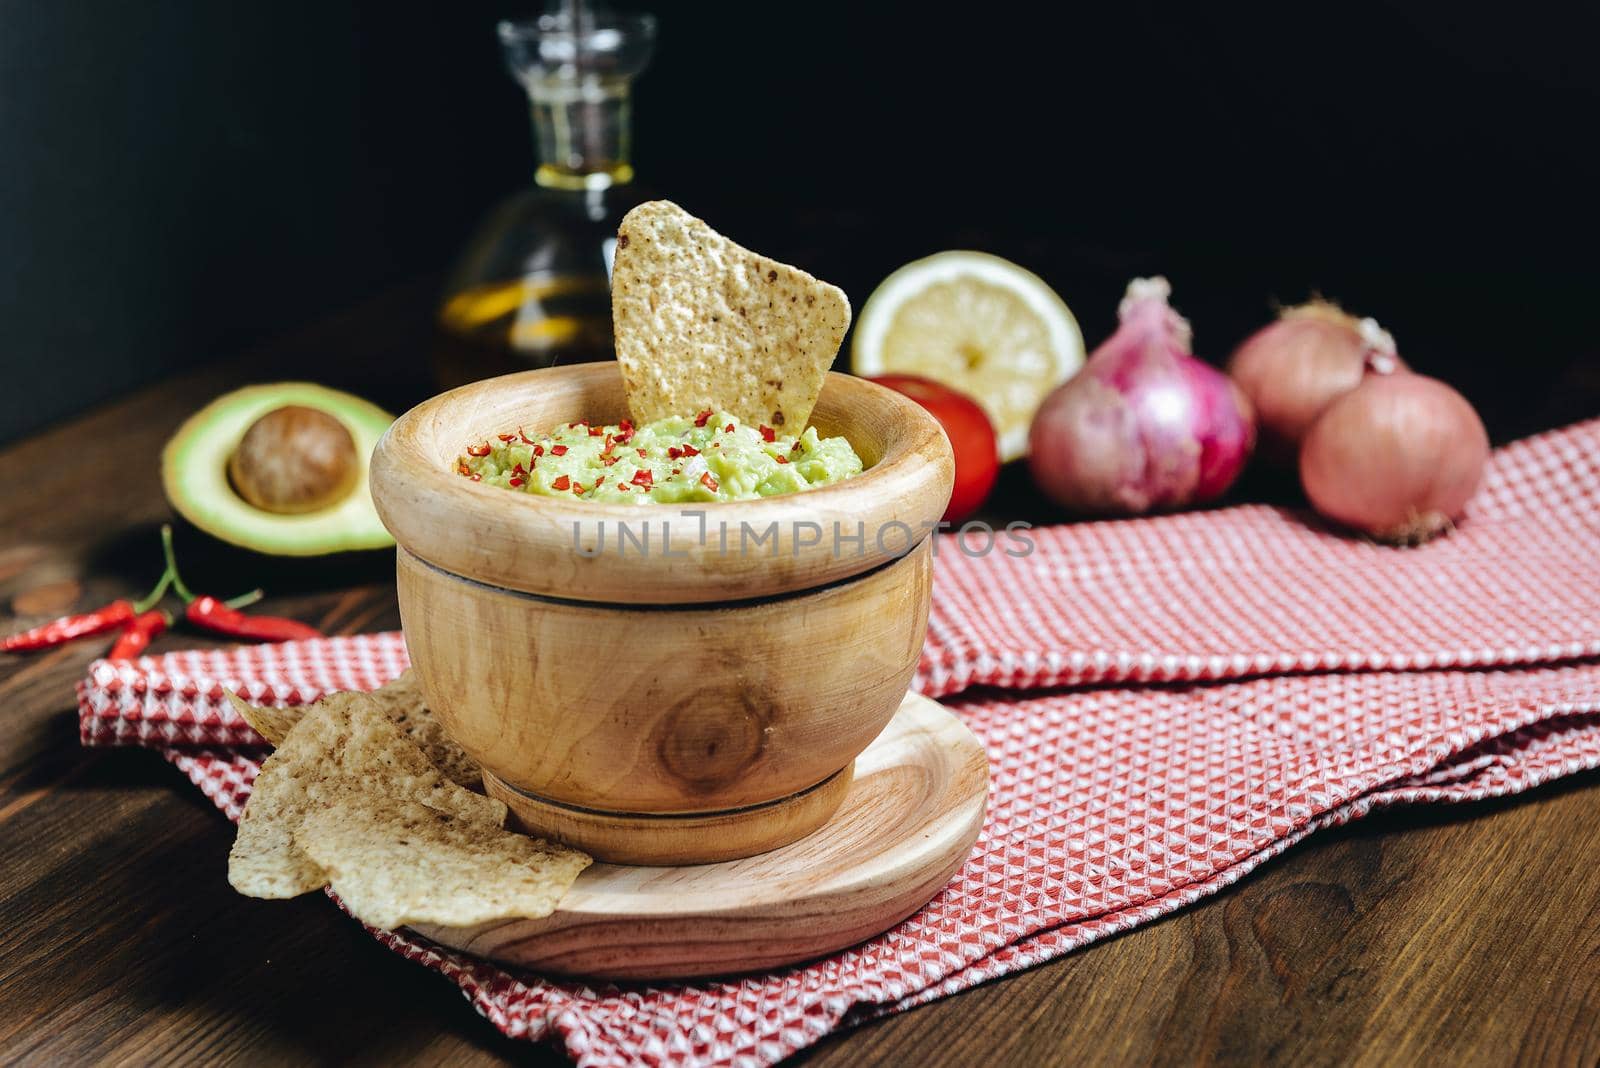 guacamole in a wood bowl with nachos next to fresh ingredients, typical mexican healthy vegan cuisine with rustic dark food photo style